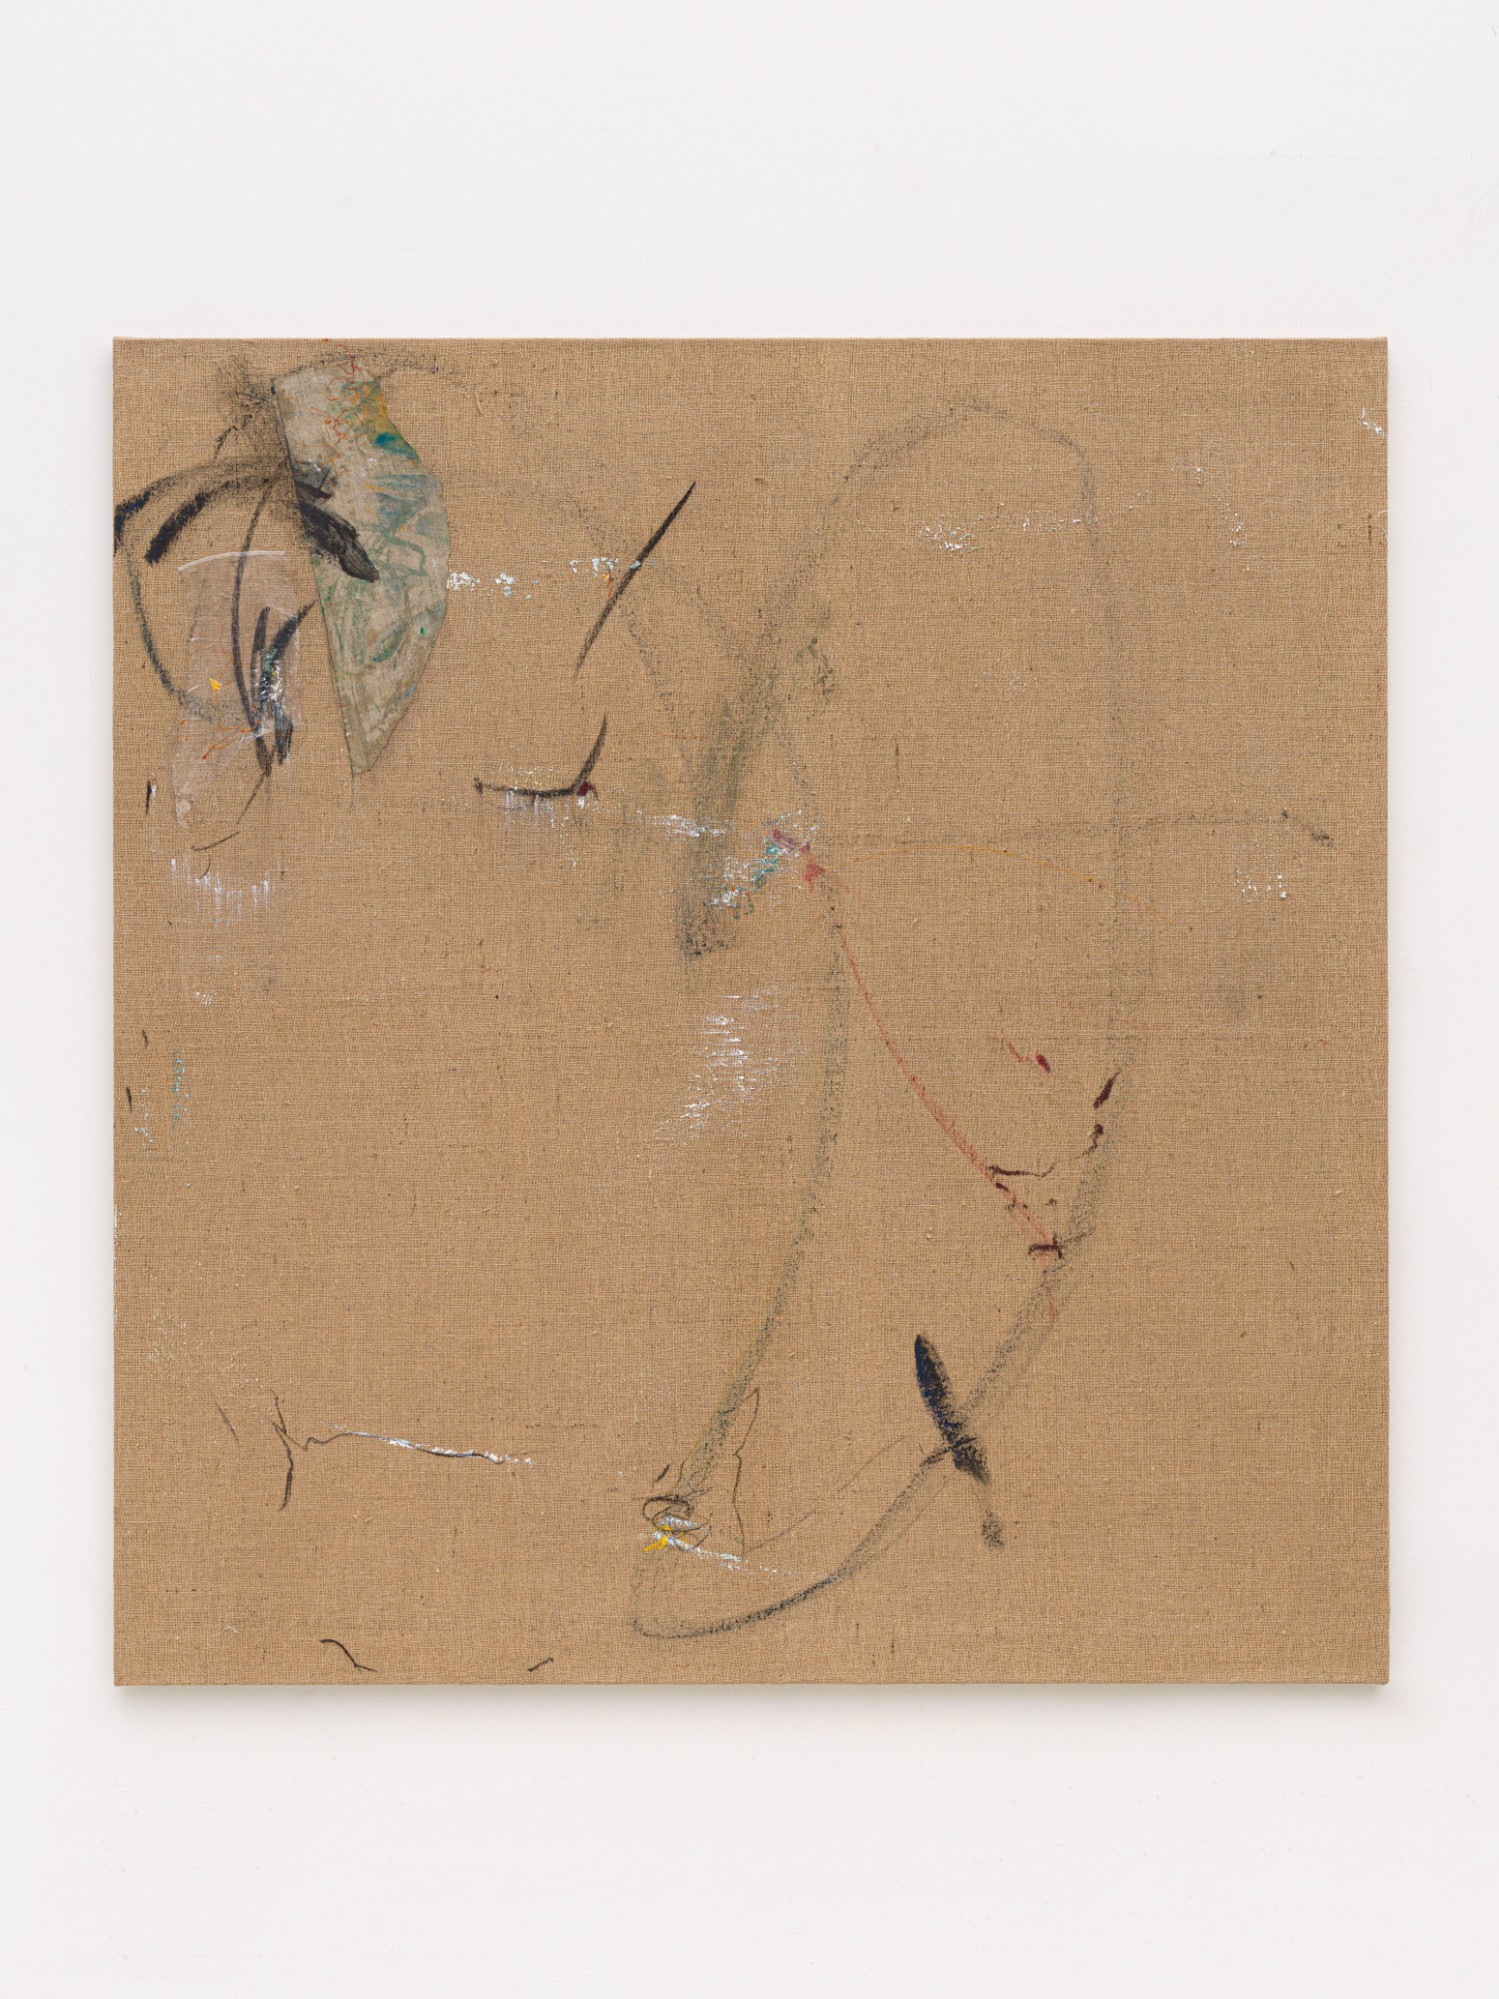 Hinako Miyabayashi, Seeds of a Letter, Fragments of Chocolate, 2023, oil and canvas on jute, 190 x 180 cm